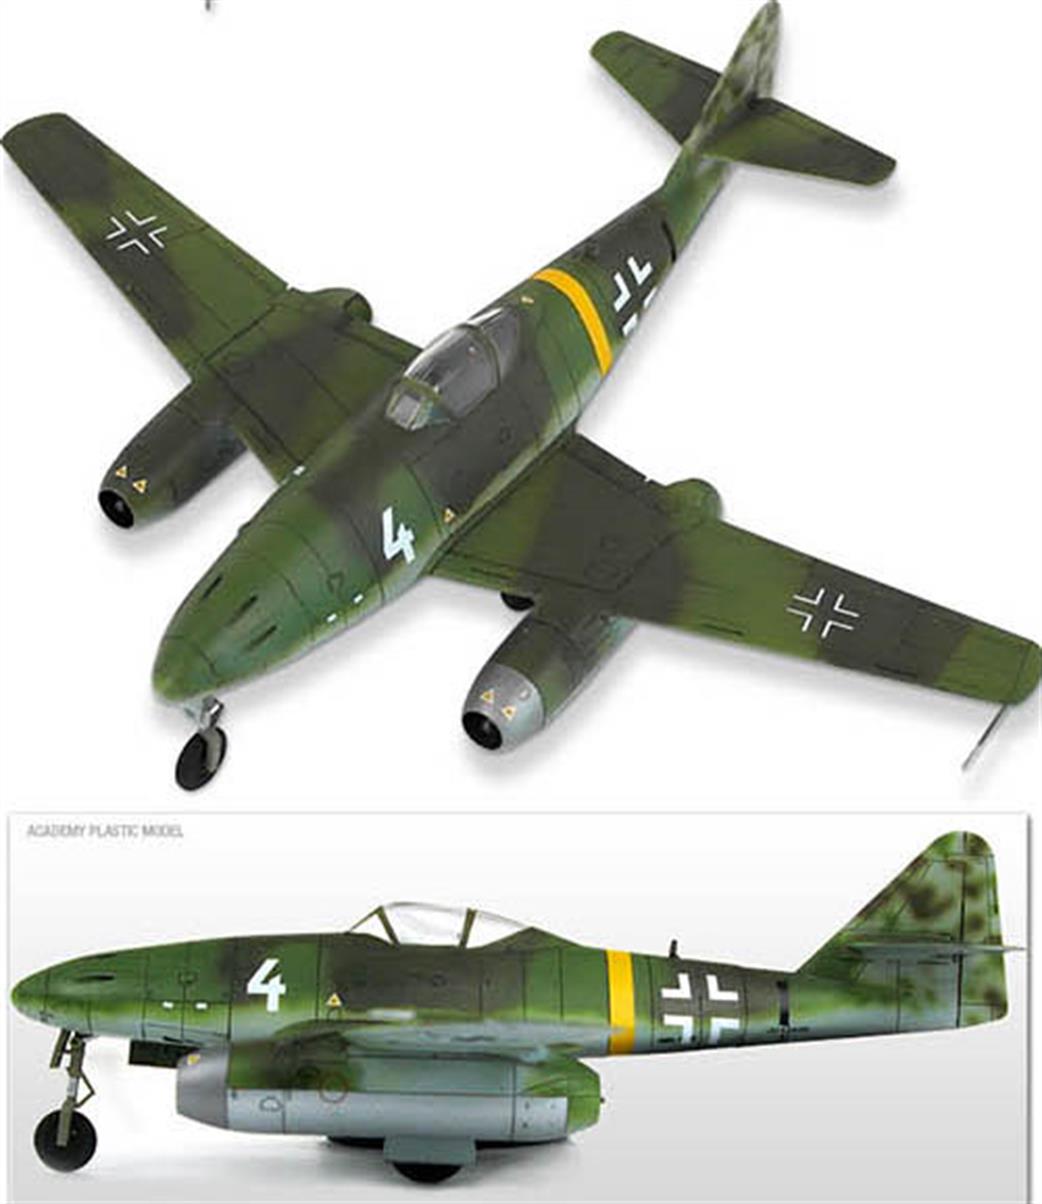 Academy 1/72 12542 German Me262A-1/2 Last Ace Limited Edition Kit